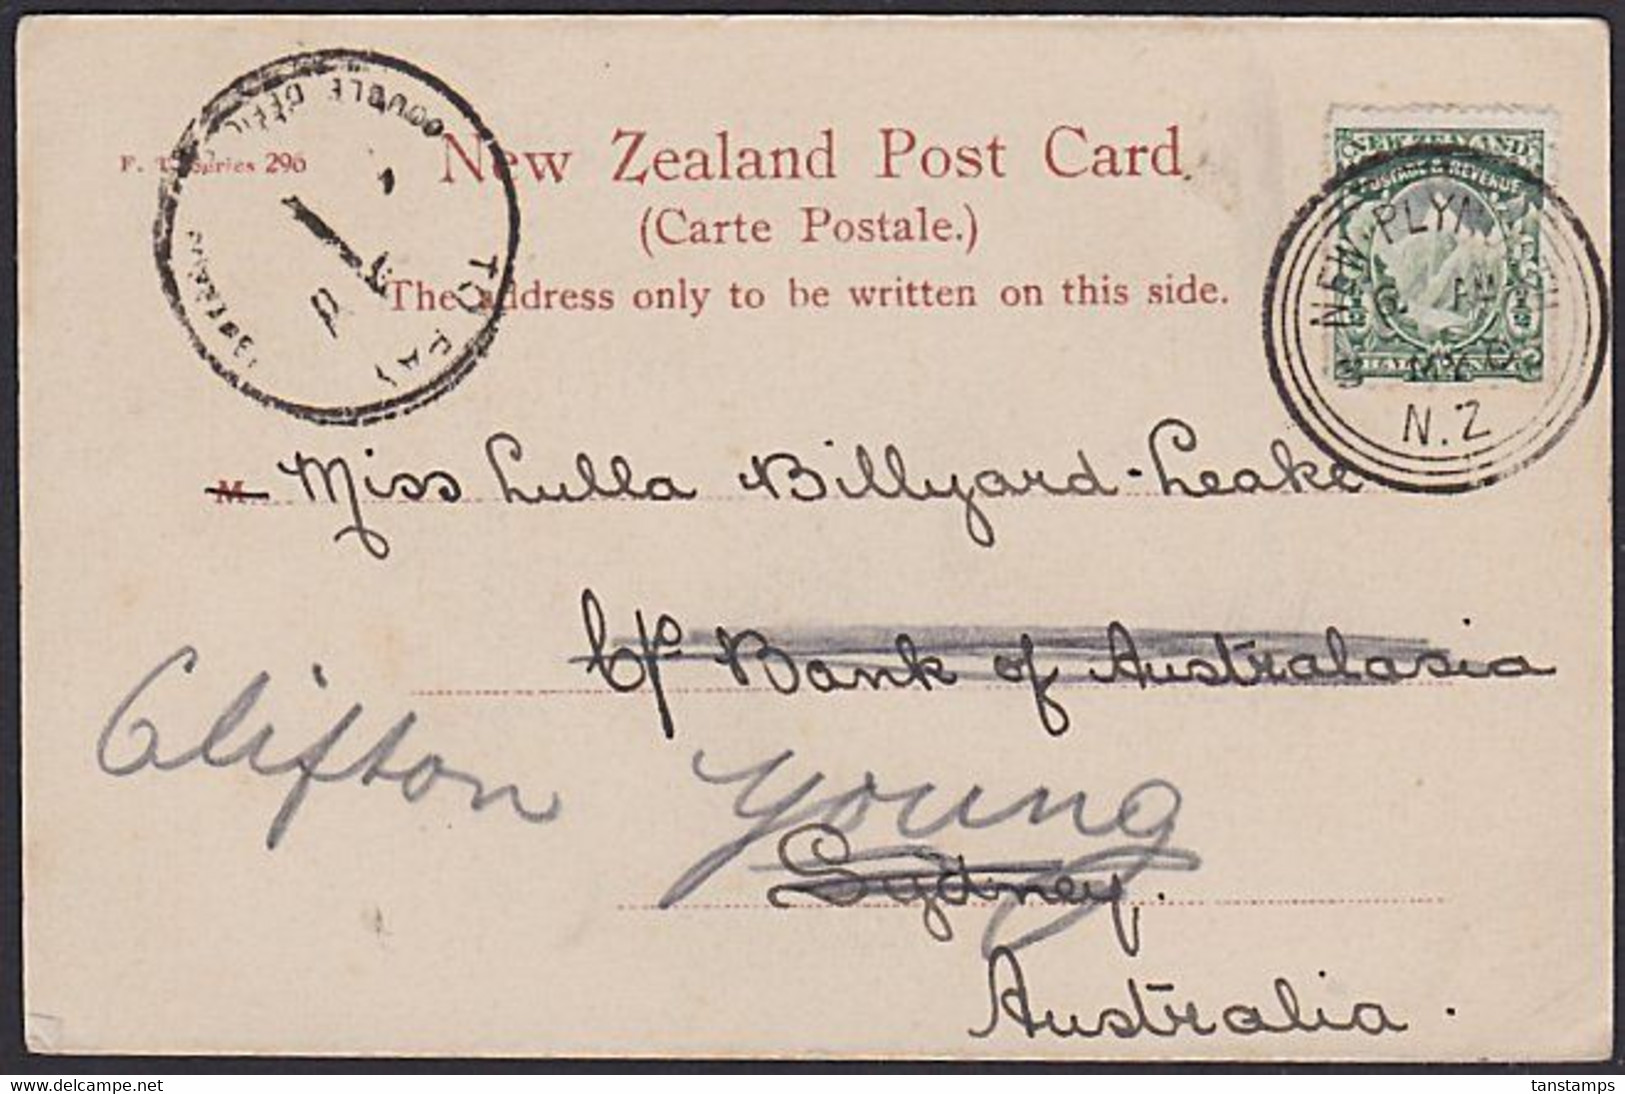 NEW PLYMOUTH BREAKWATER NZ 1905 POSTCARD DOUBLE DEFICIENCY 1d TO PAY POSTMARK - Cartas & Documentos